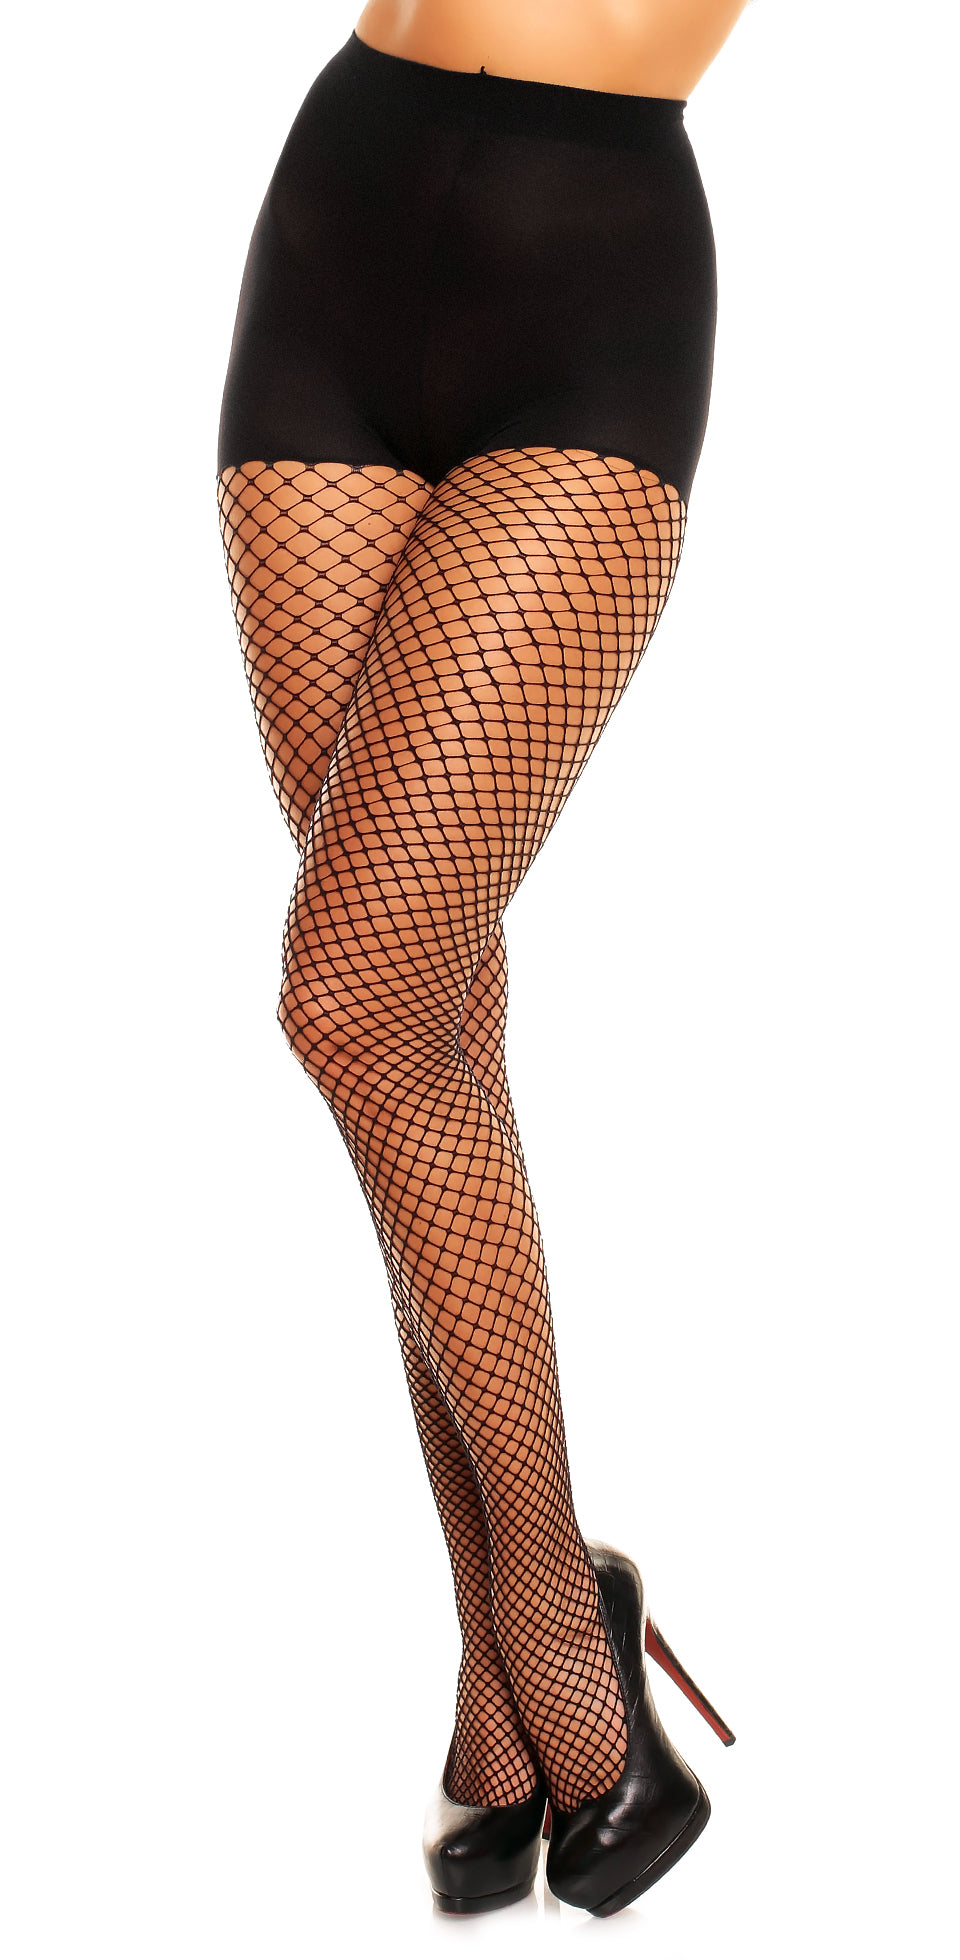 Black Luxury Fishnet Tights with Seamless Panty.